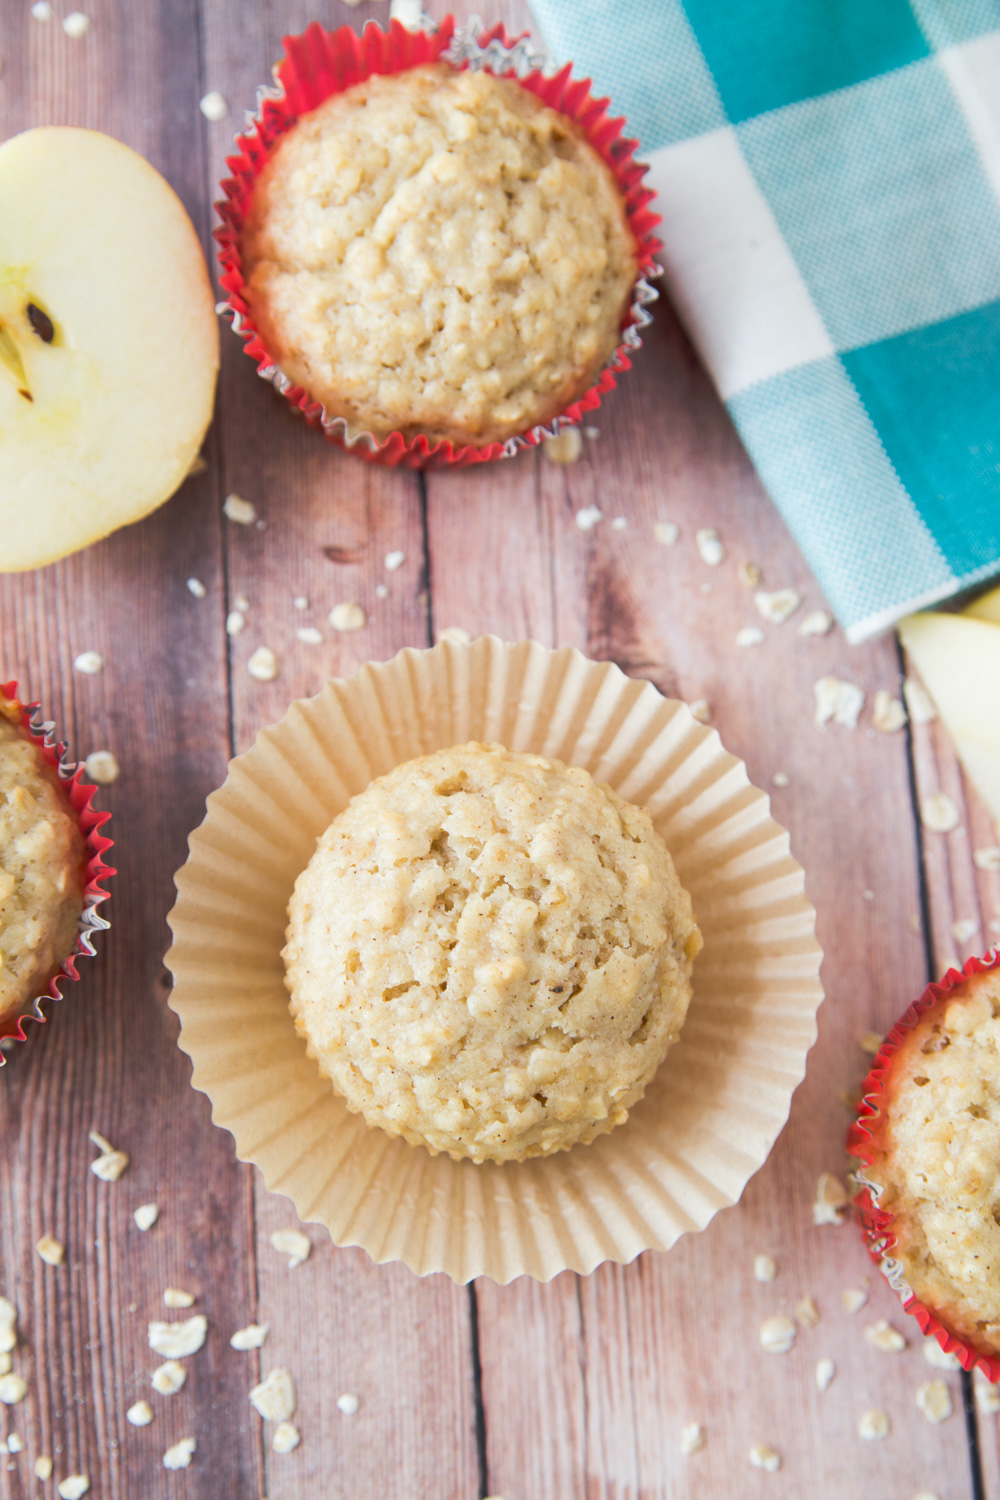 These Oat & Apple Muffins are the perfect breakfast muffin.  They have a touch of sweetness from the honey and apples and a hint of fall with the cinnamon spice.